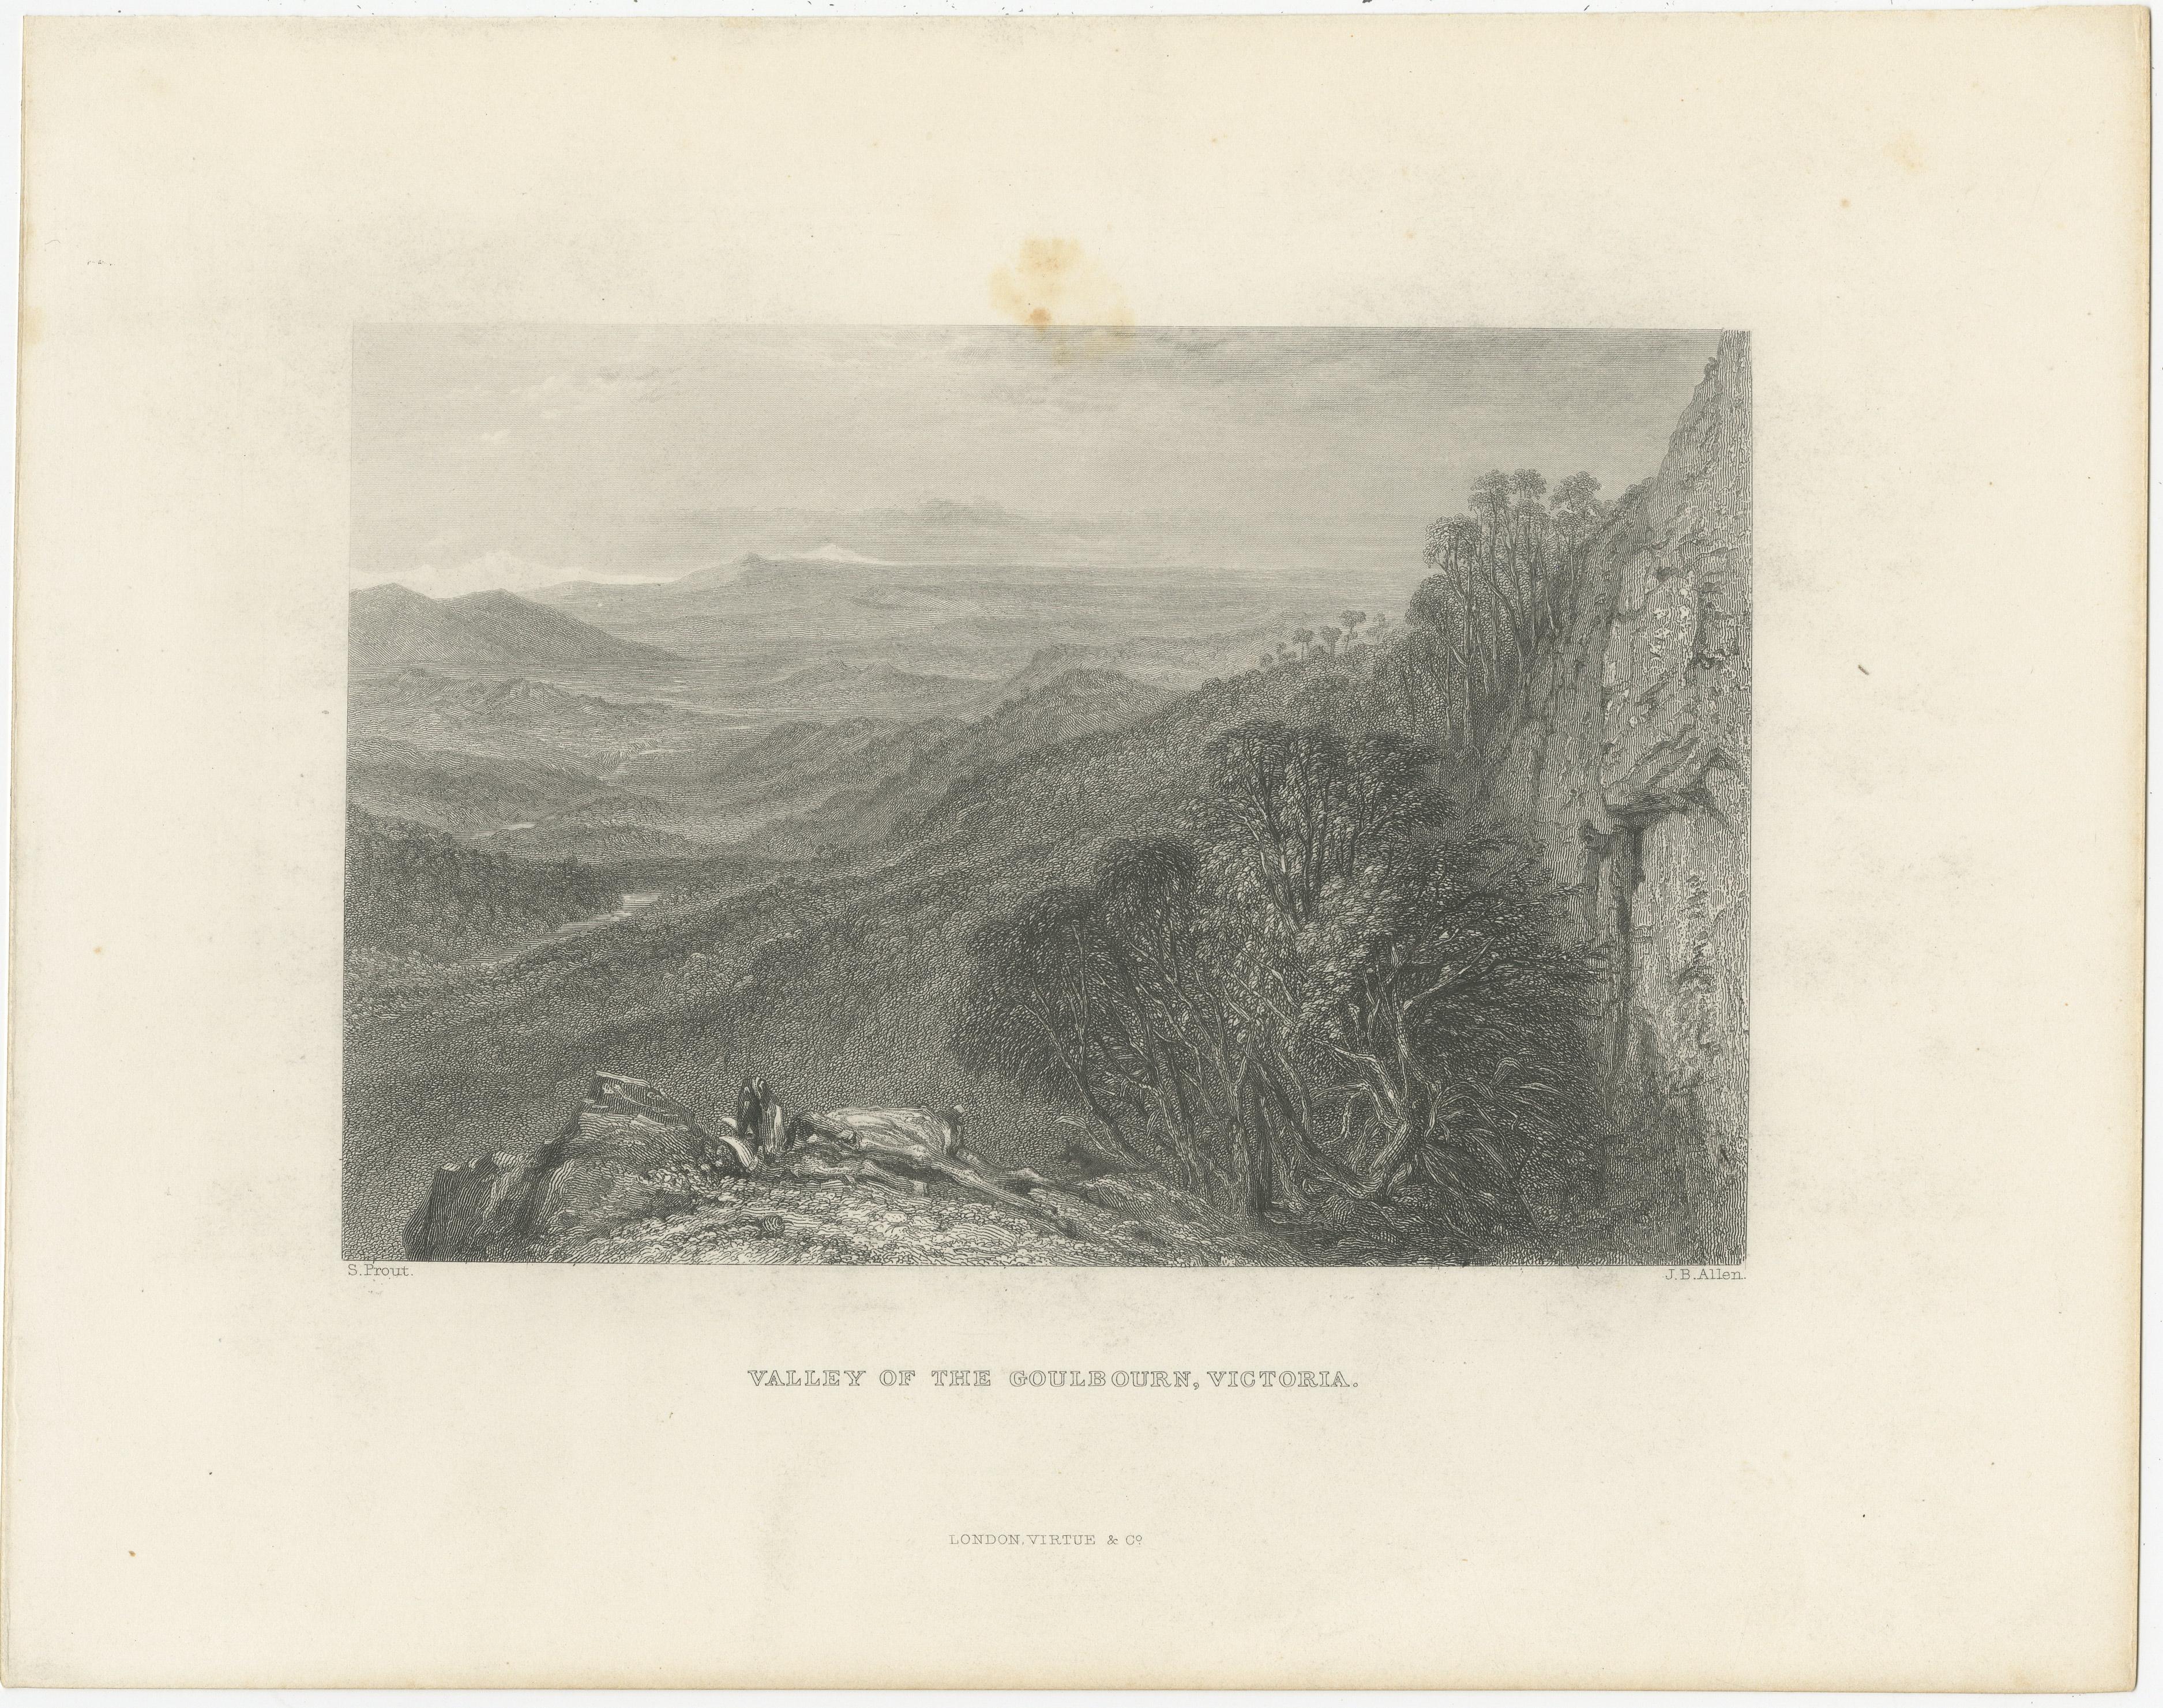 Antique print titled 'Valley of the Goulbourn, Victoria'. View of Goulburn Valley, Victoria, Australia. Engraved by J.B. Allen after S. Prout. Published by Virtue & Co, circa 1875.